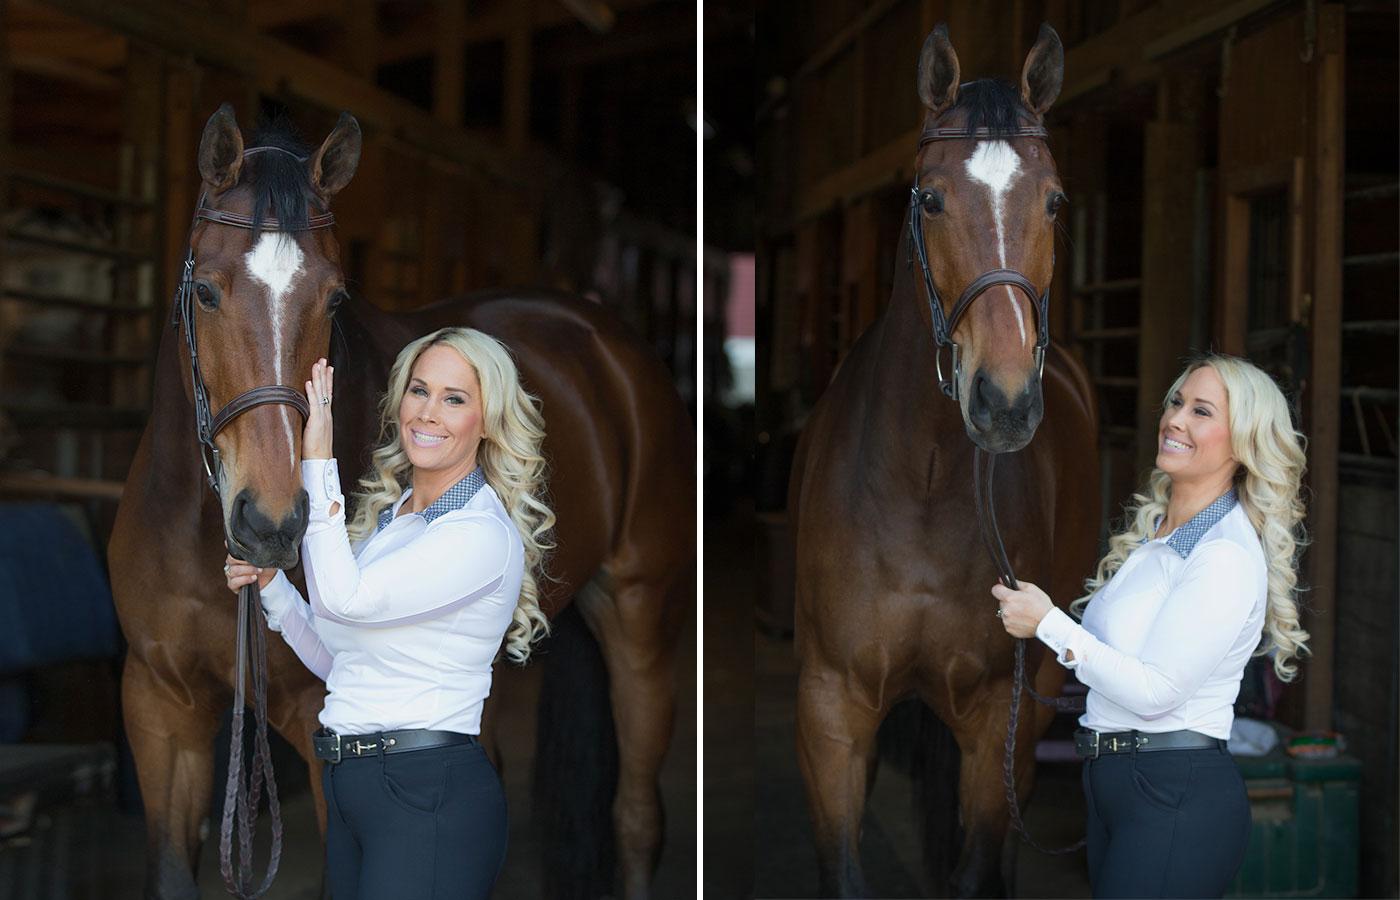 Larissa Cook of FBN-Construction with her horse 